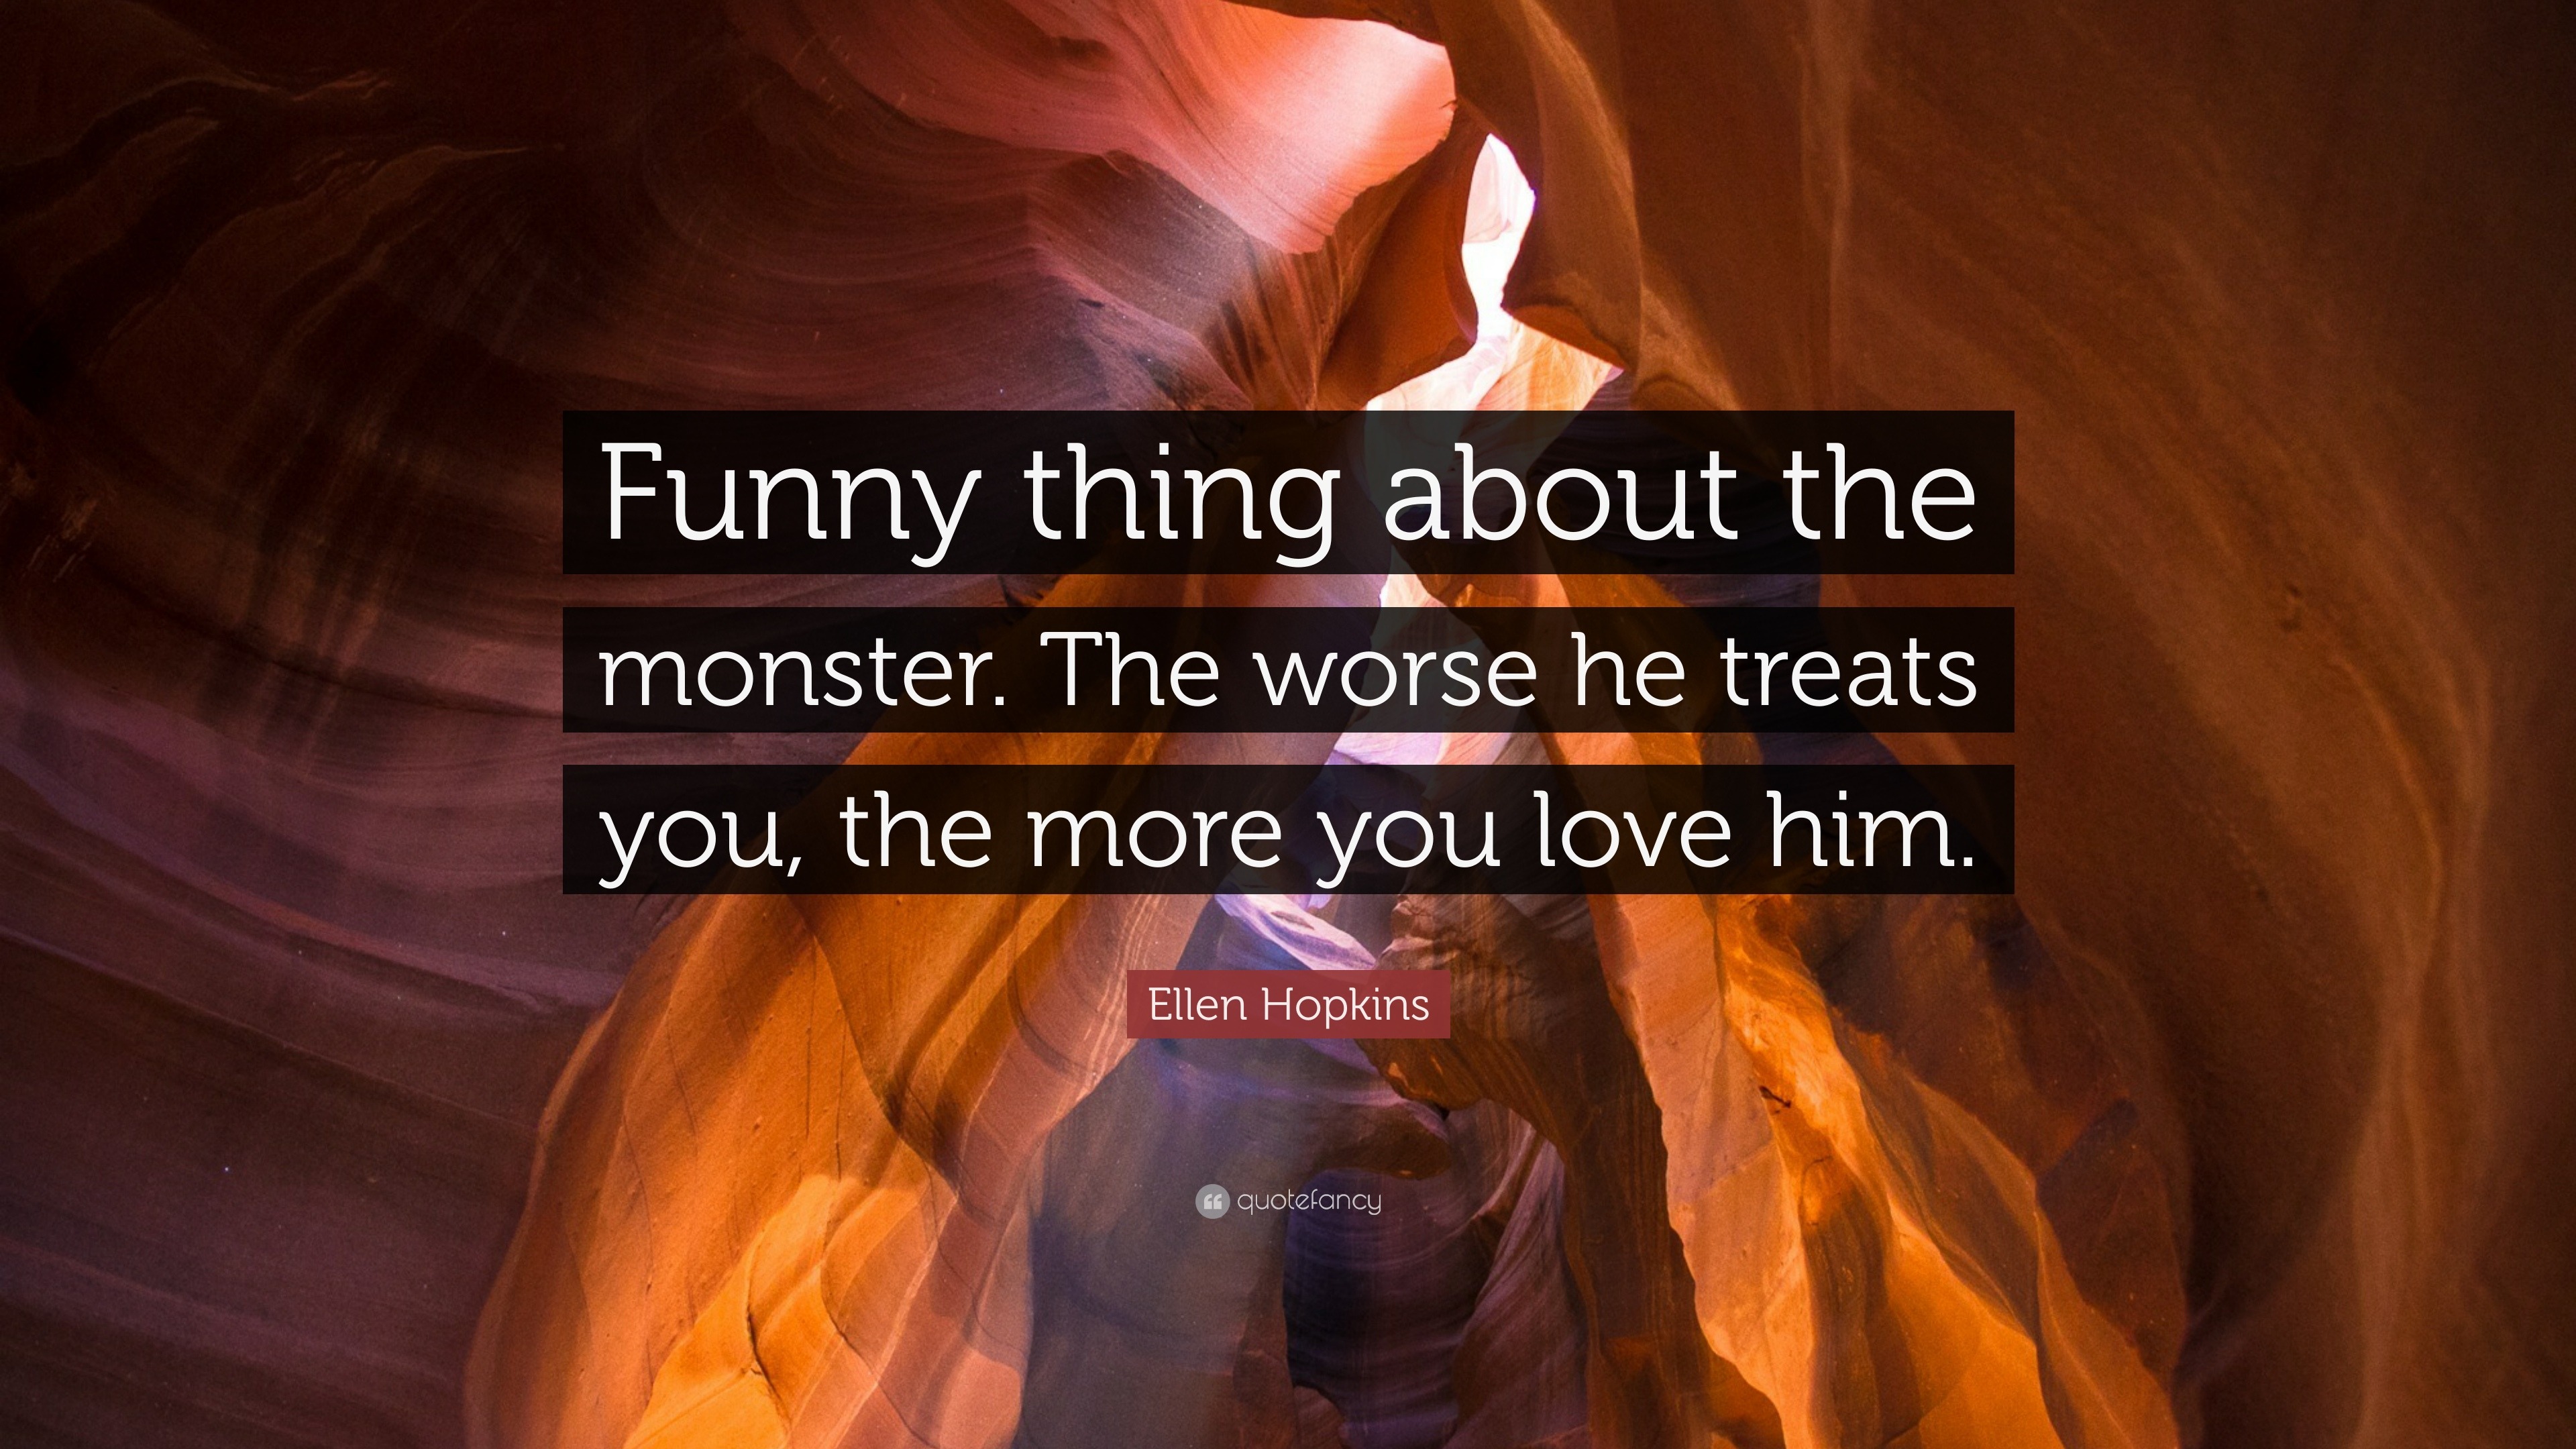 Ellen Hopkins Quote: “Funny thing about the monster. The worse he treats  you, the more you